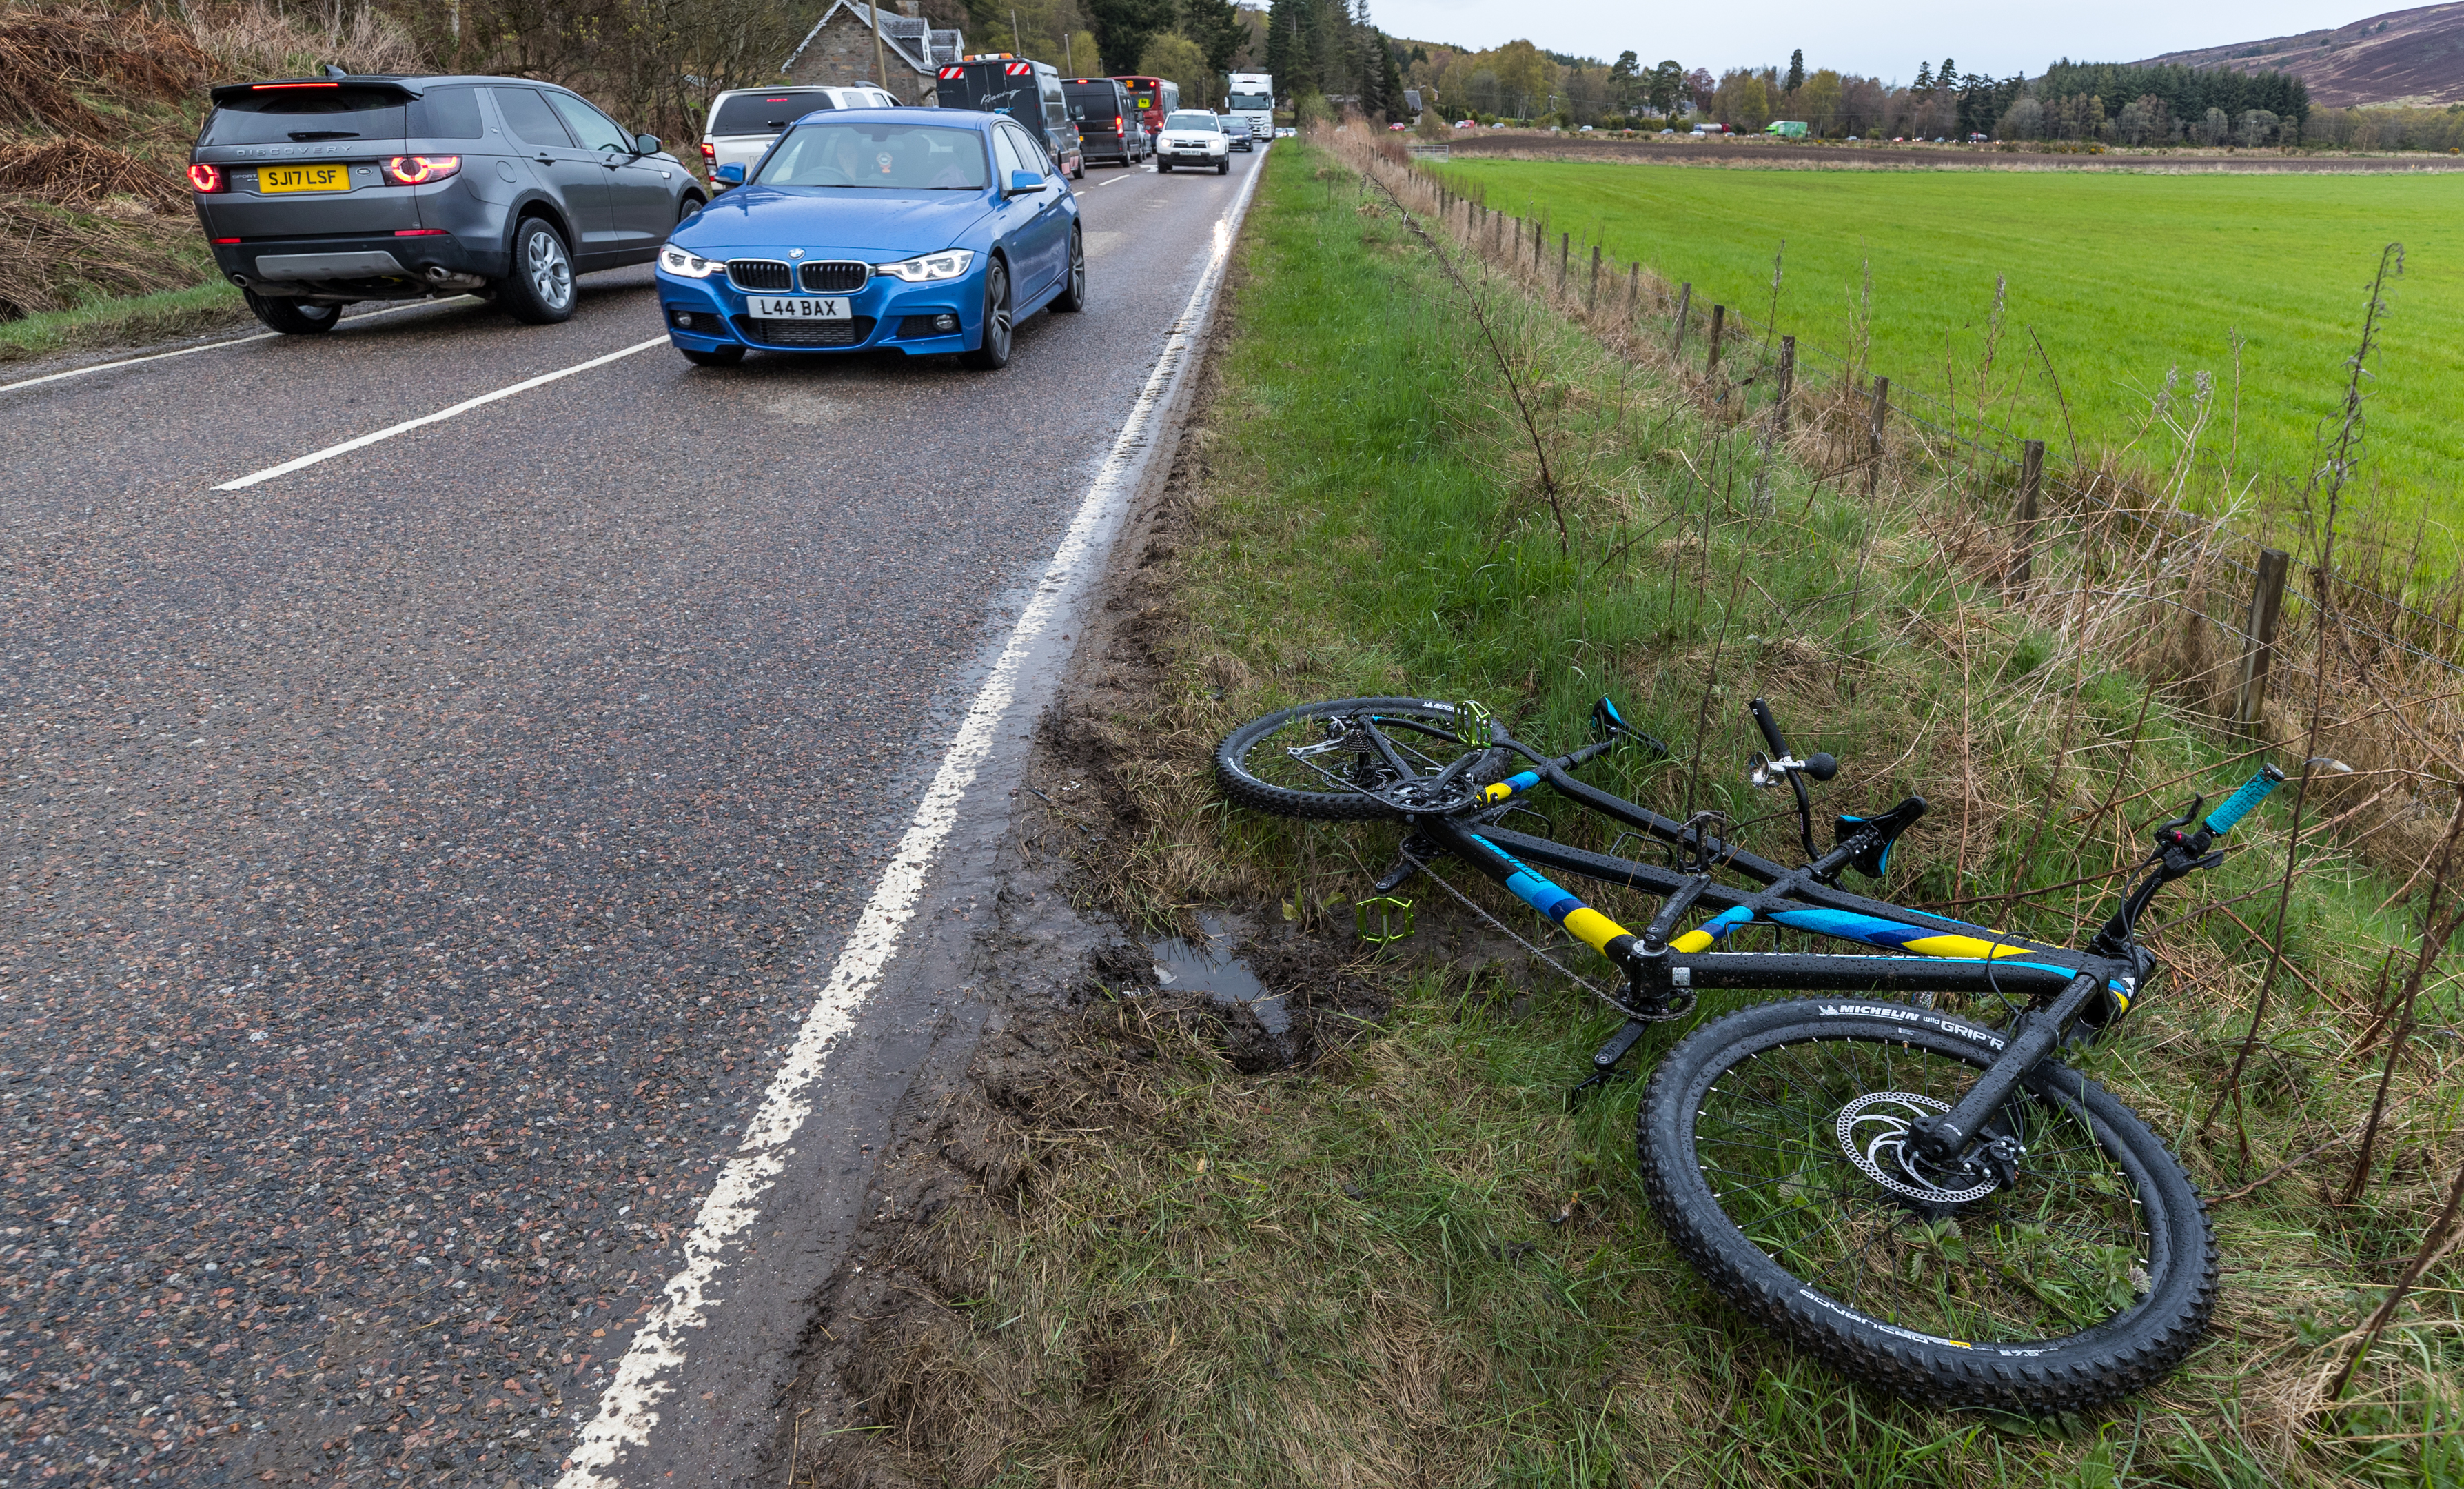 Police and ambulance teams were called to the scene of the incident on the A947 where a cyclist had been injured.